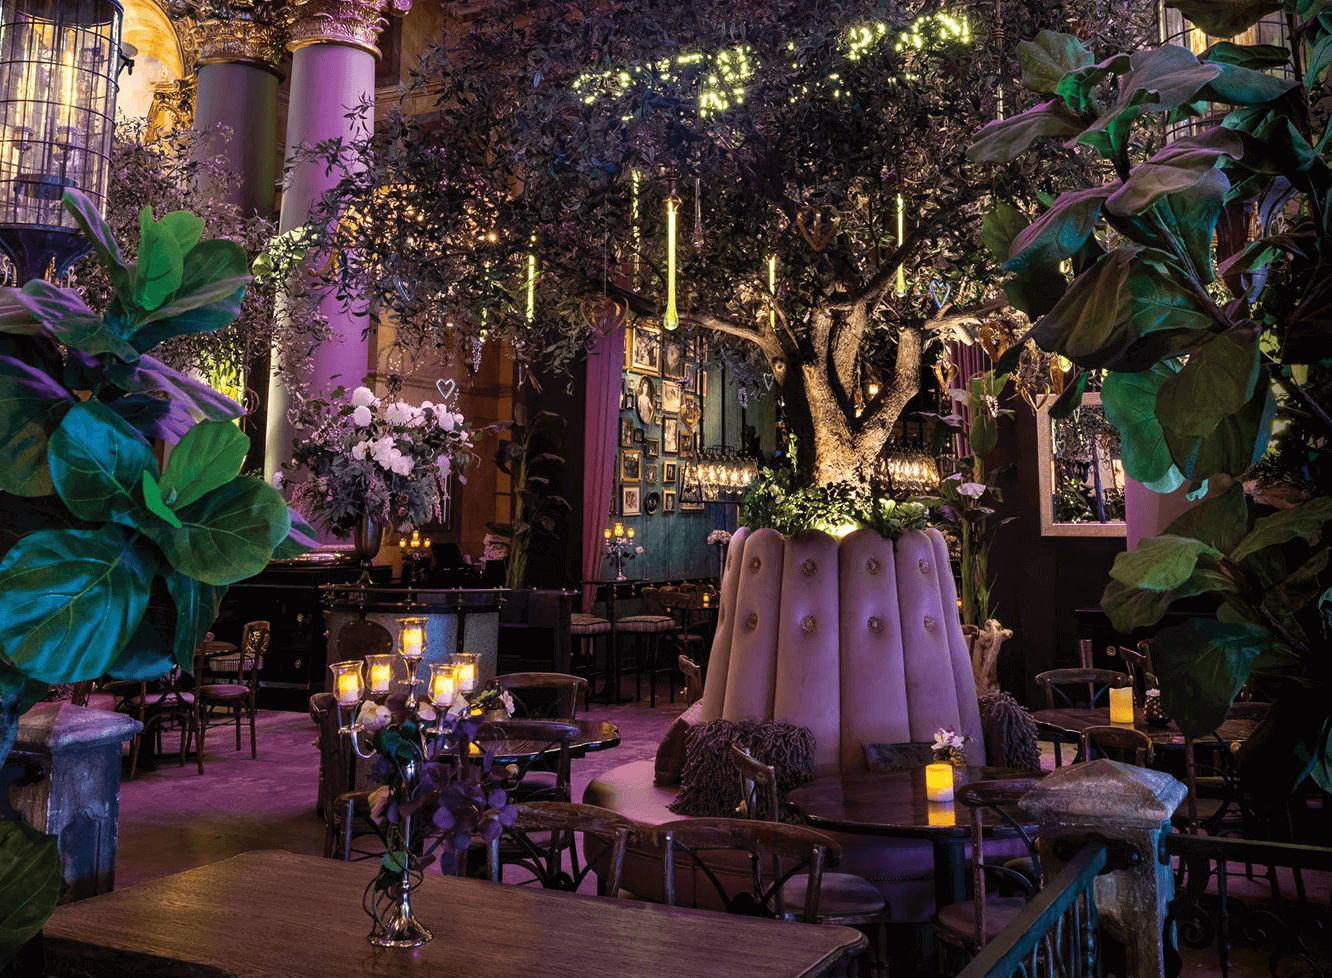 Faux trees, plants, and flowers at Vanderpump Cocktail Garden at Caesars Palace